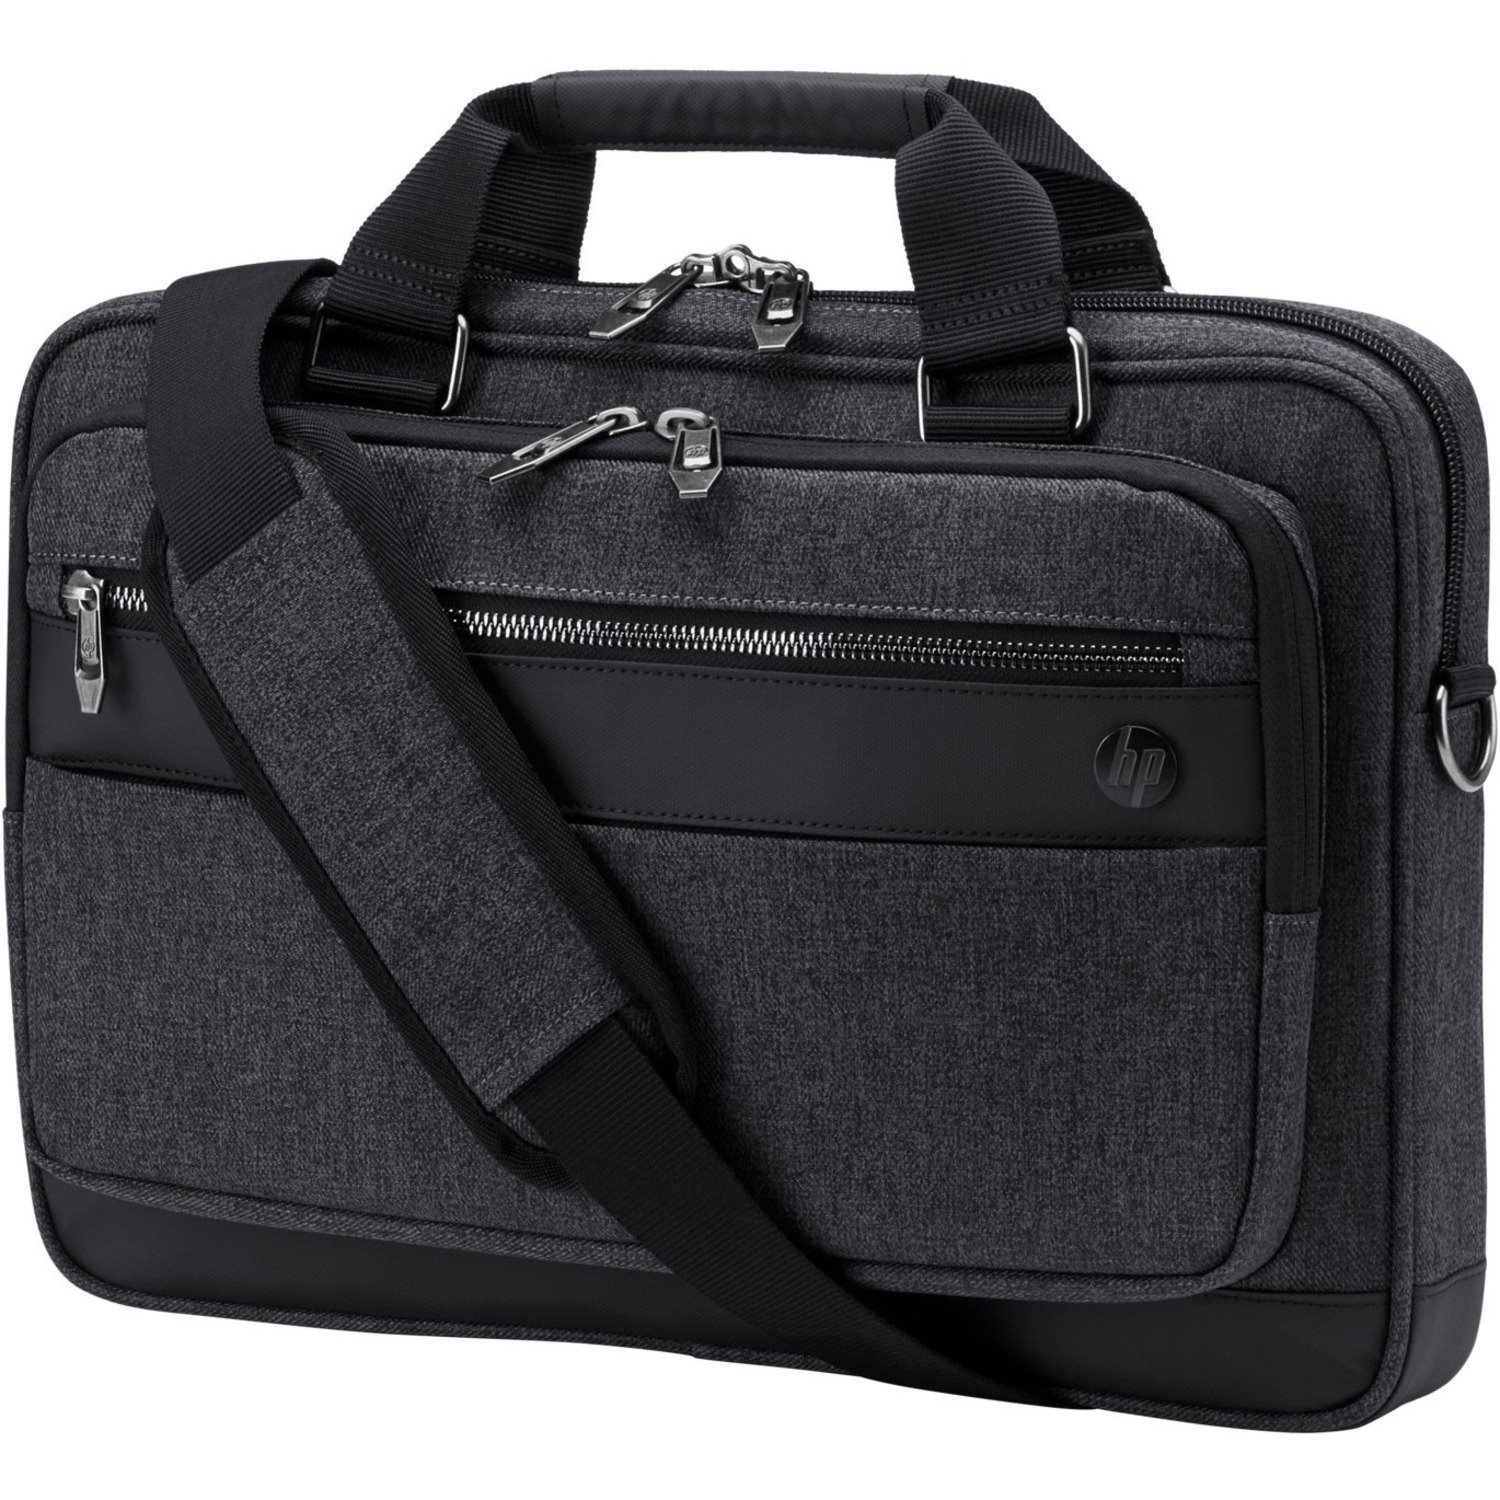 HP Executive Carrying Case for 14.1" Notebook - Black